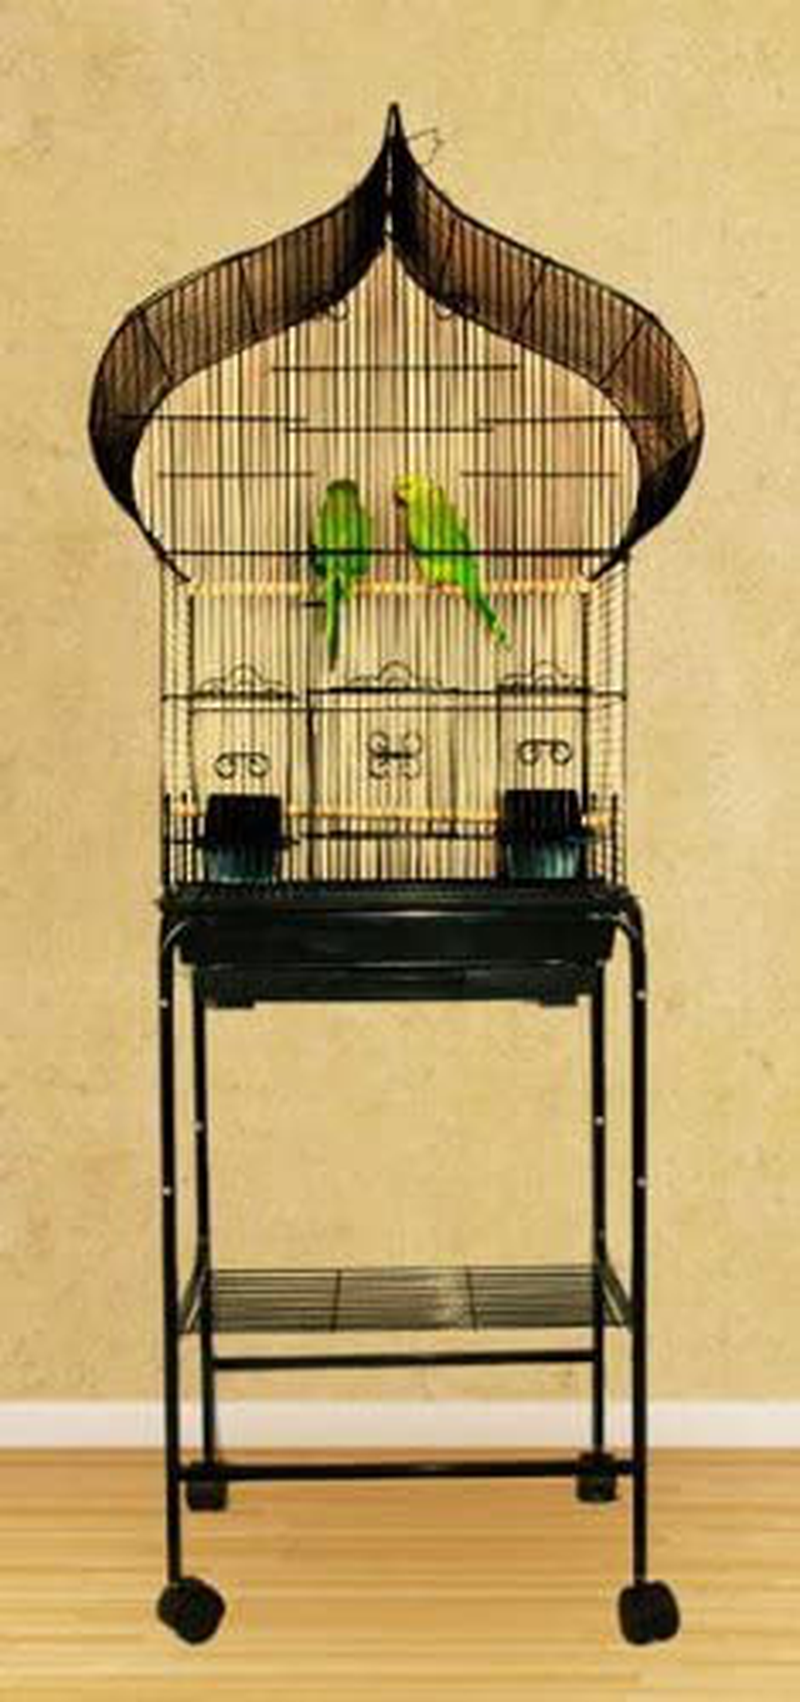 finch bird cages